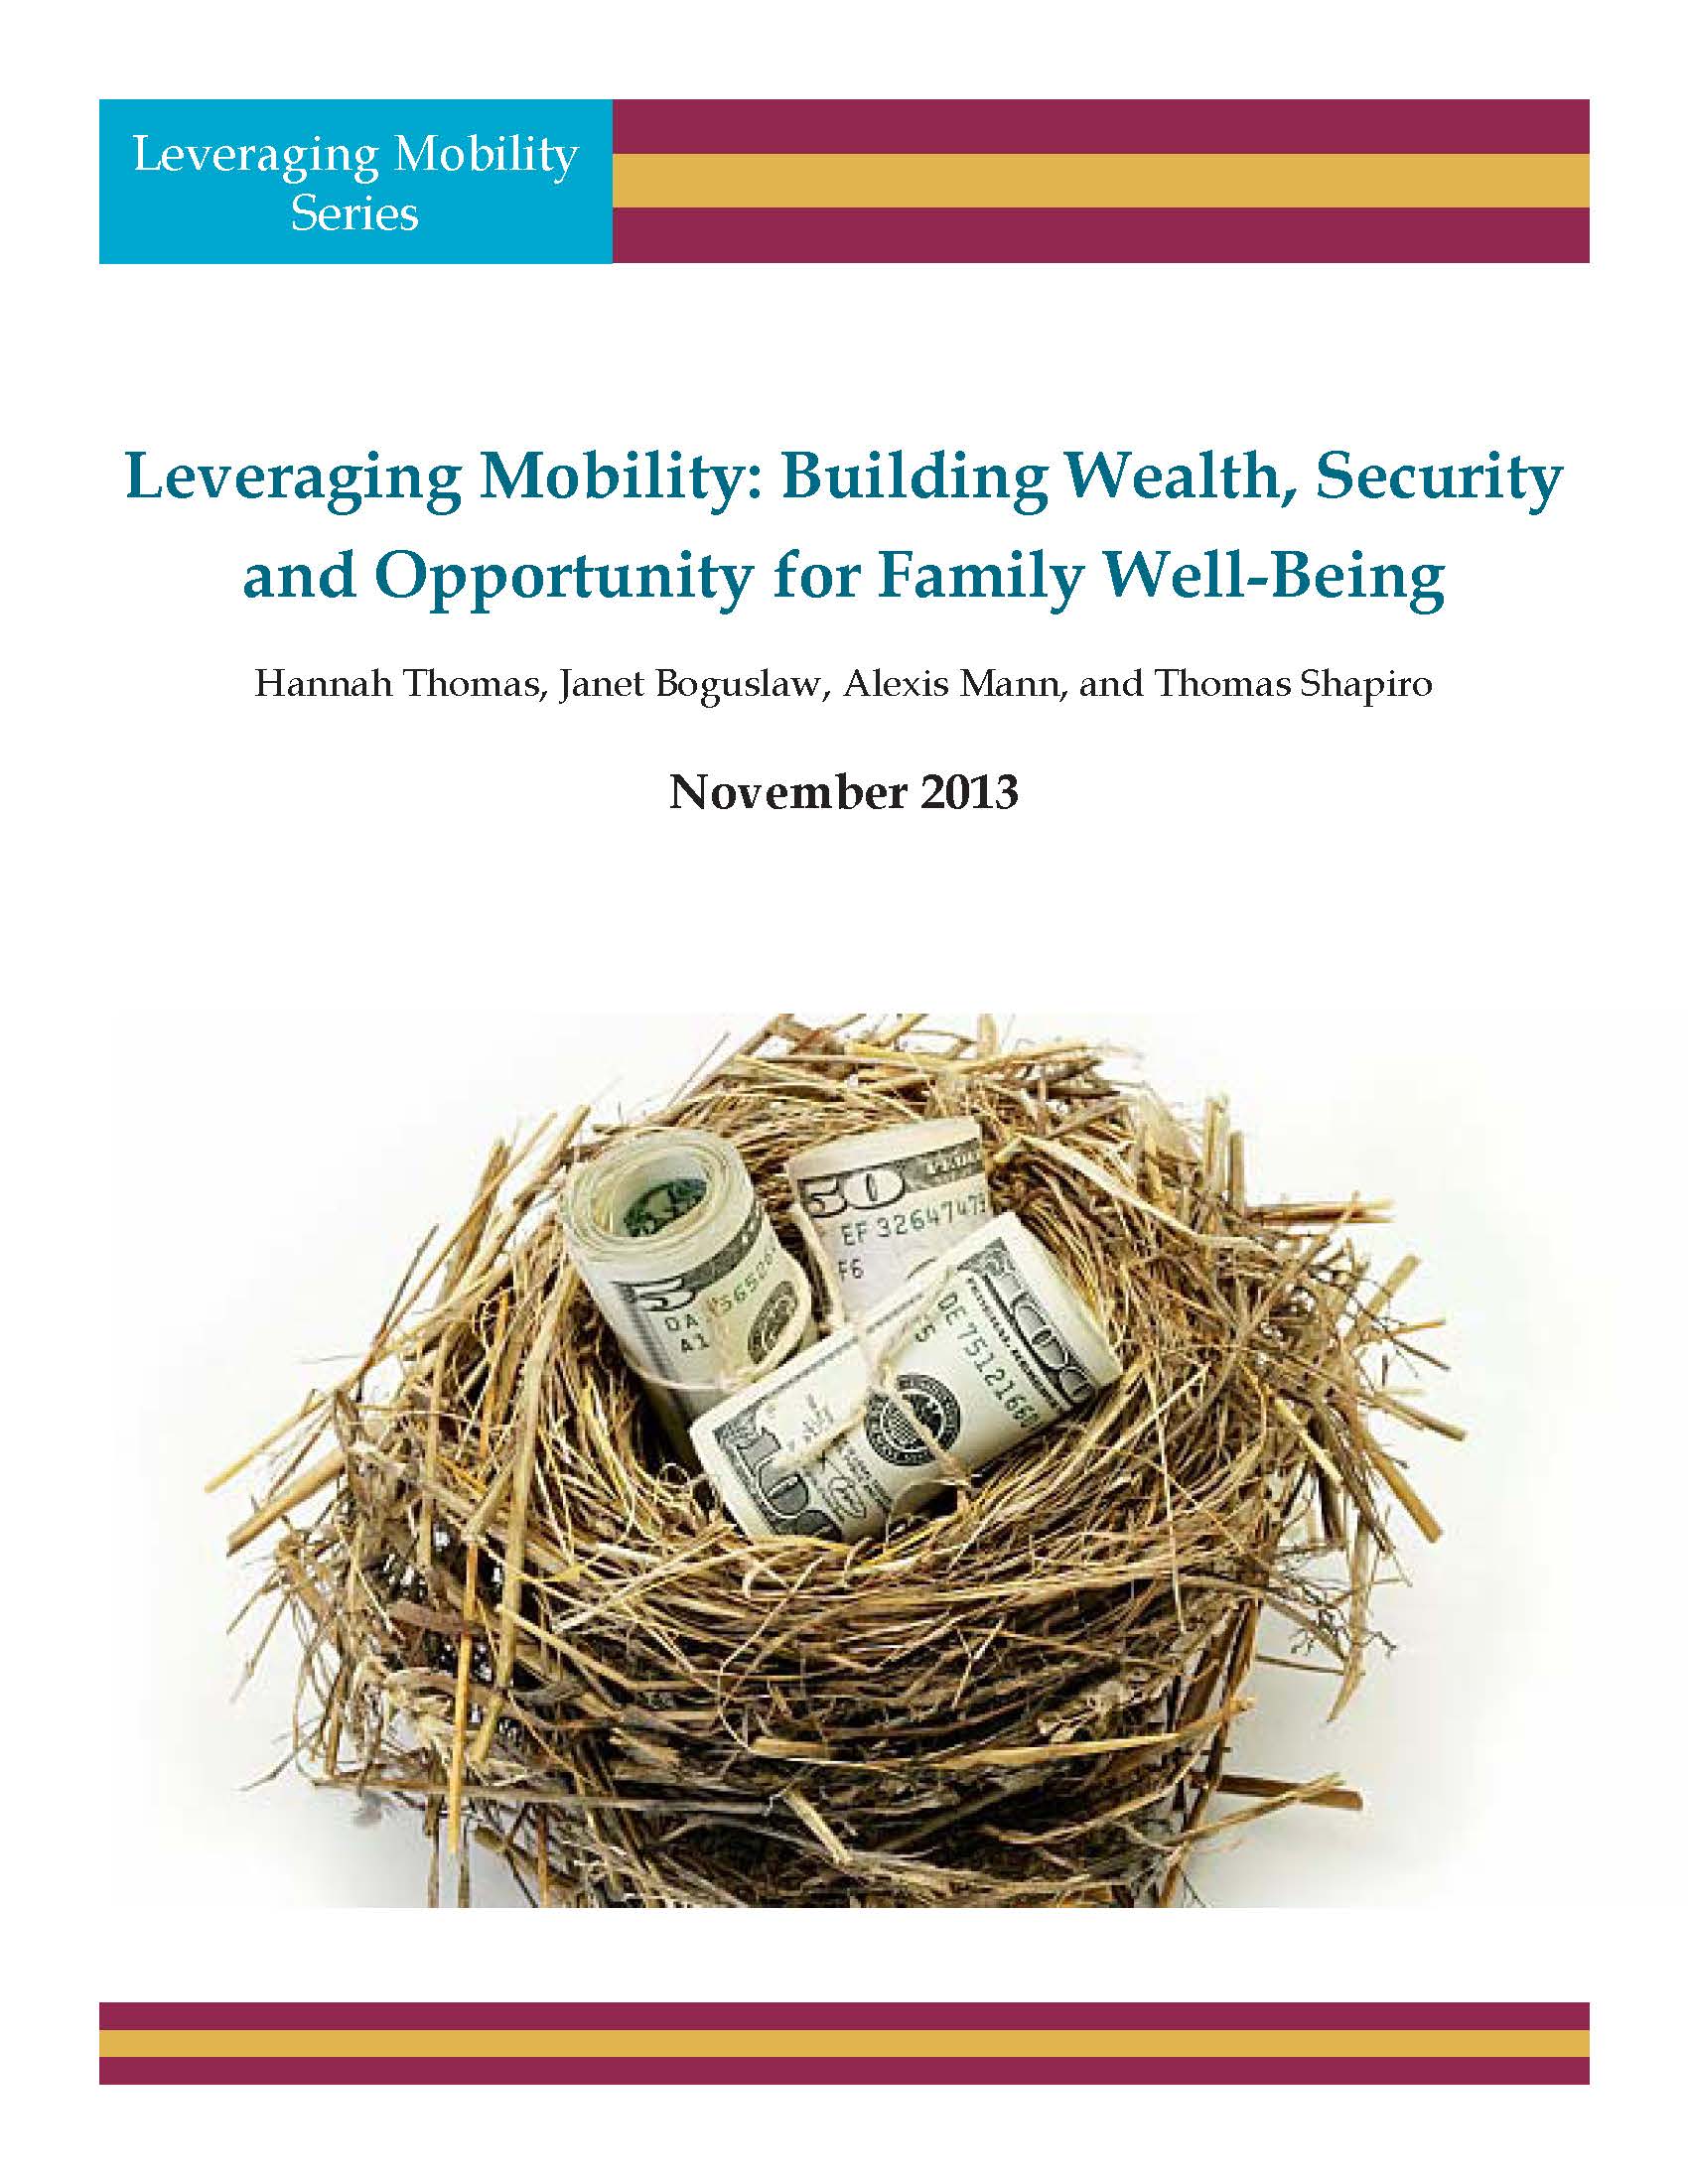 Cover of leveraging mobility report